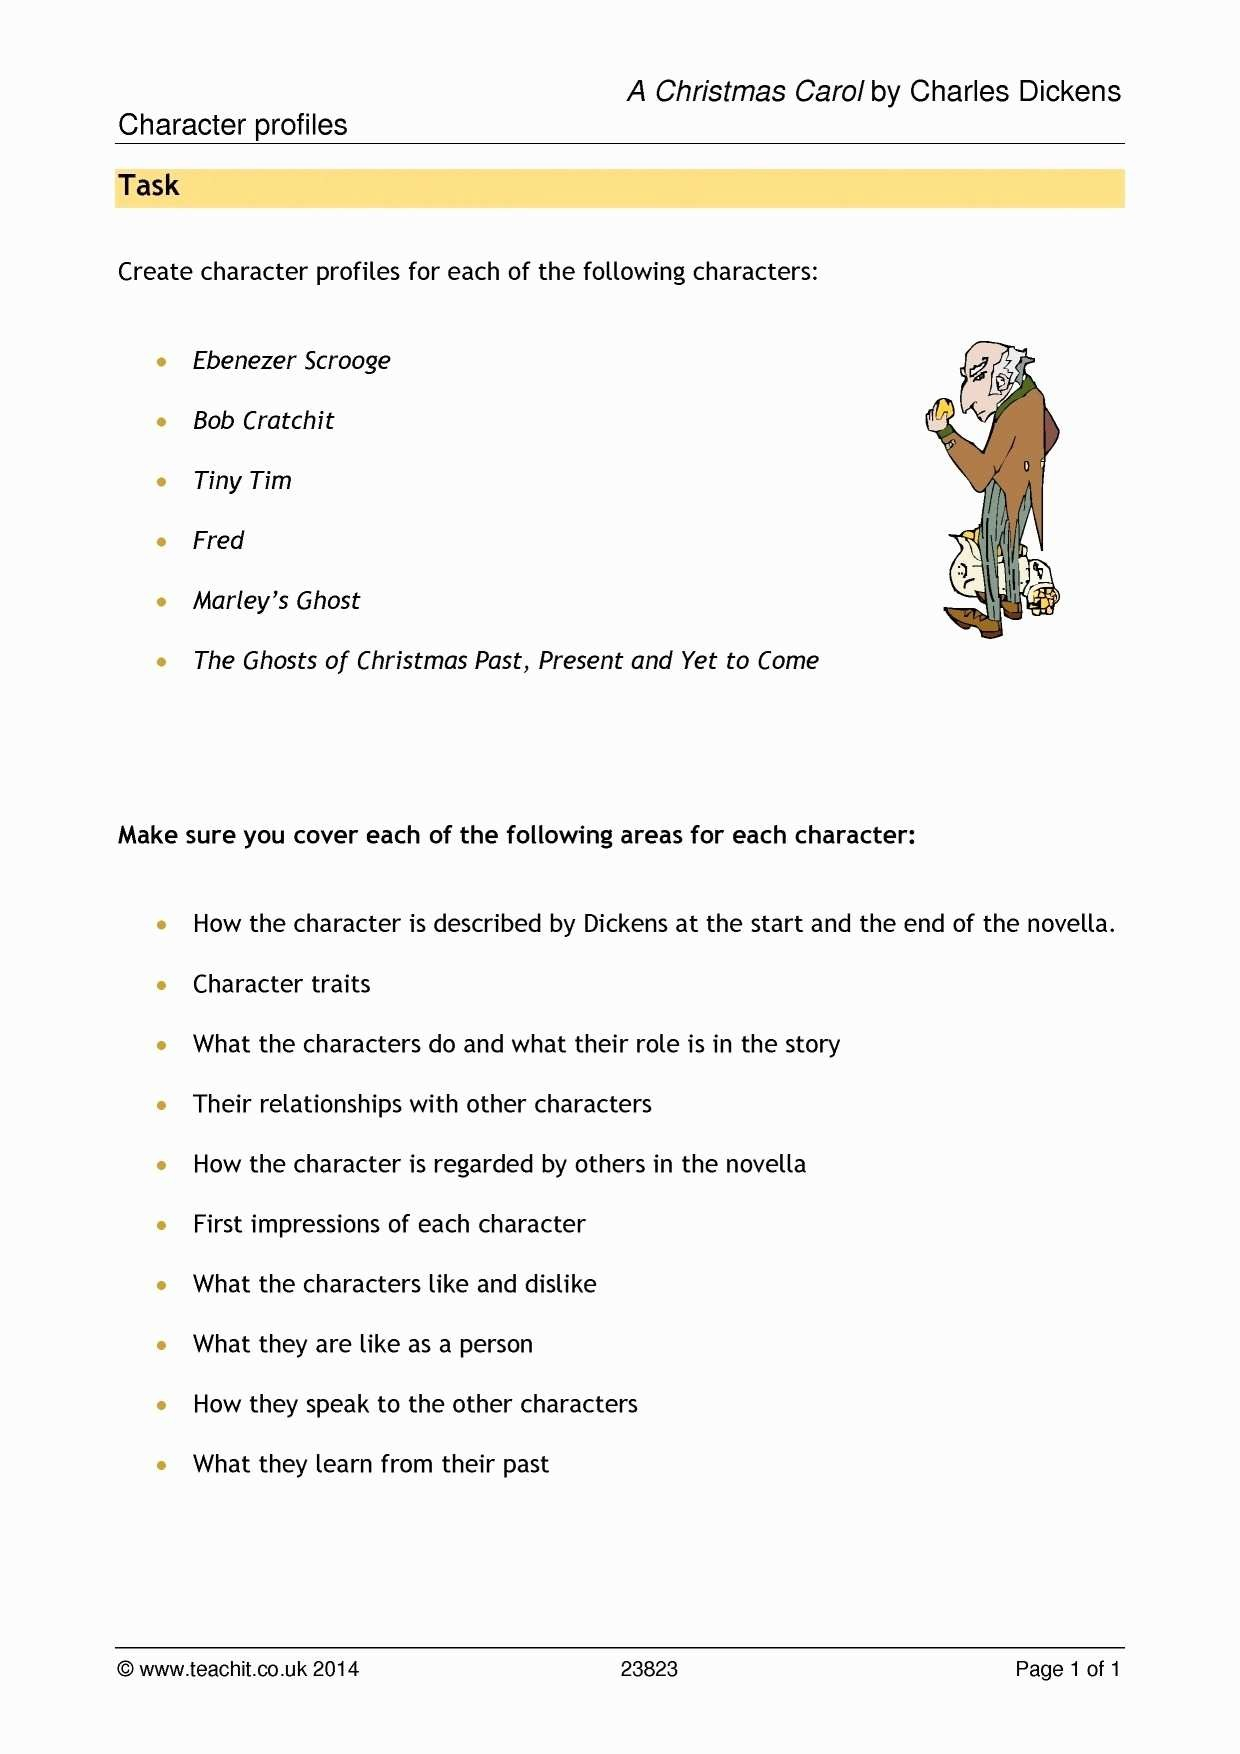 letter a template for preschool Collection-Worksheet Letter J Inspirational Guess the Christmas Carol Worksheet New Charles Causley 0d 0a 18-l